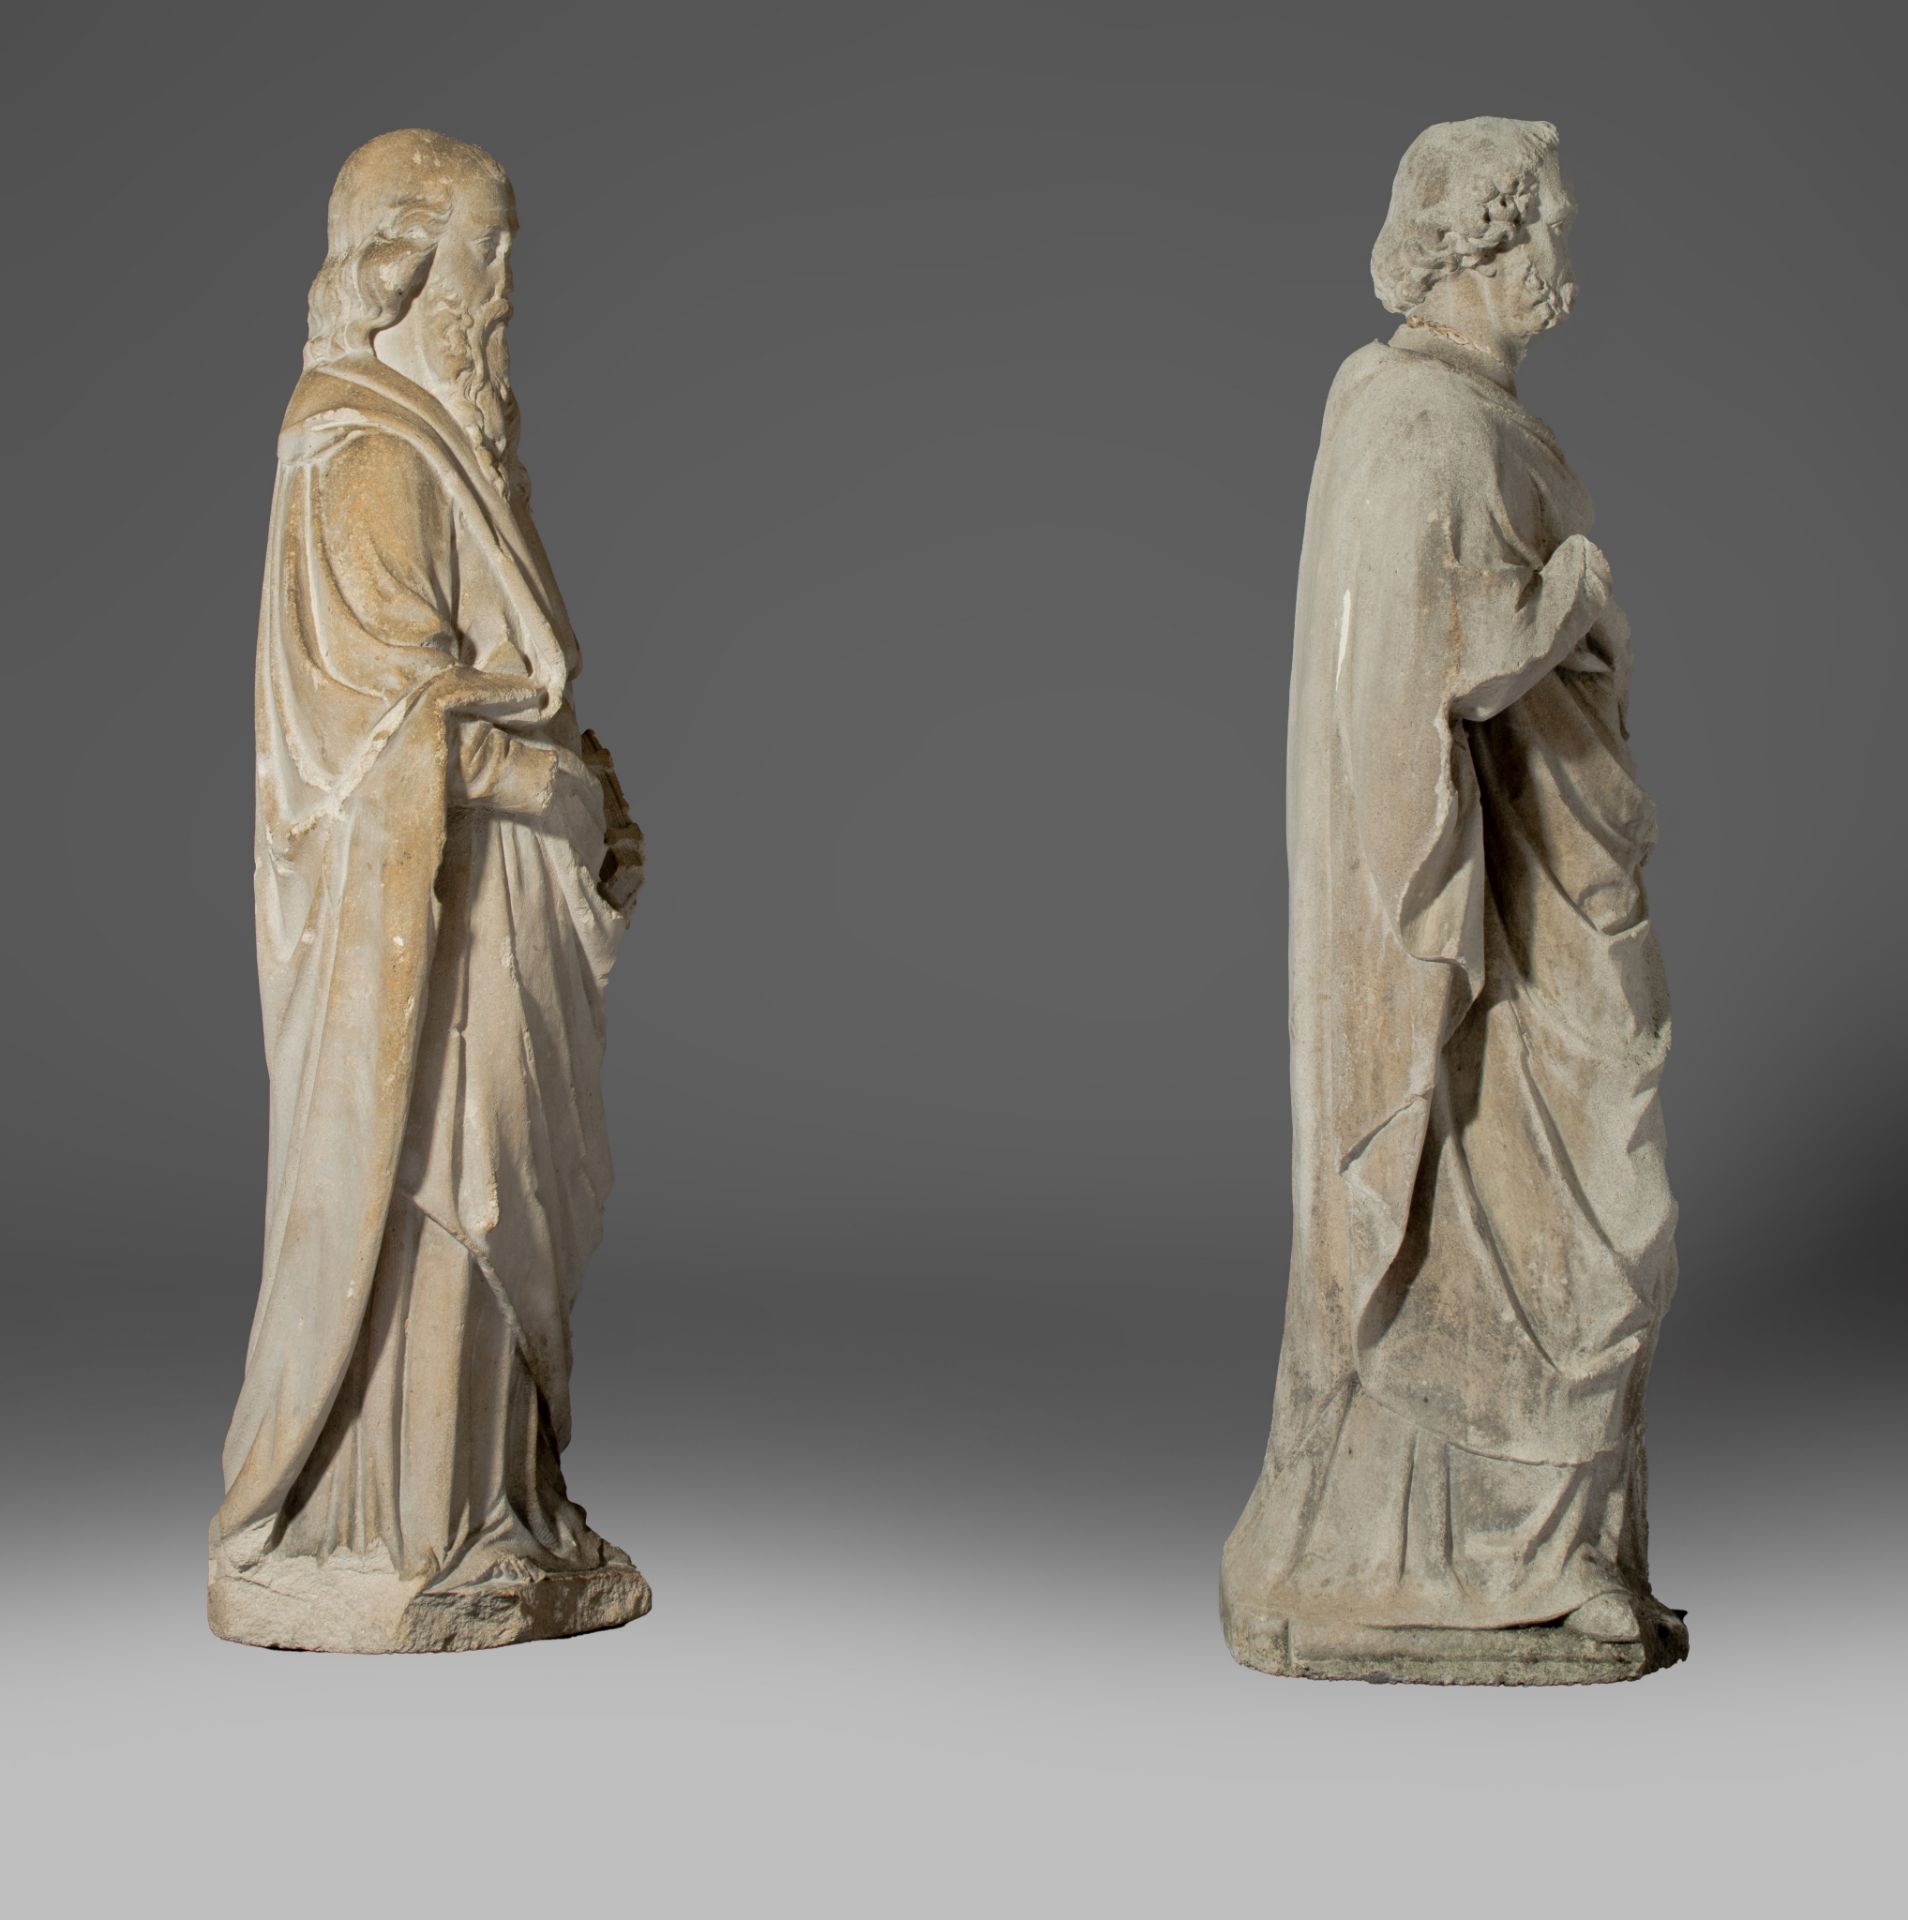 Two matching reconstituted stone sculptures of standing evangelists, H 83 - 85 cm - Image 6 of 11